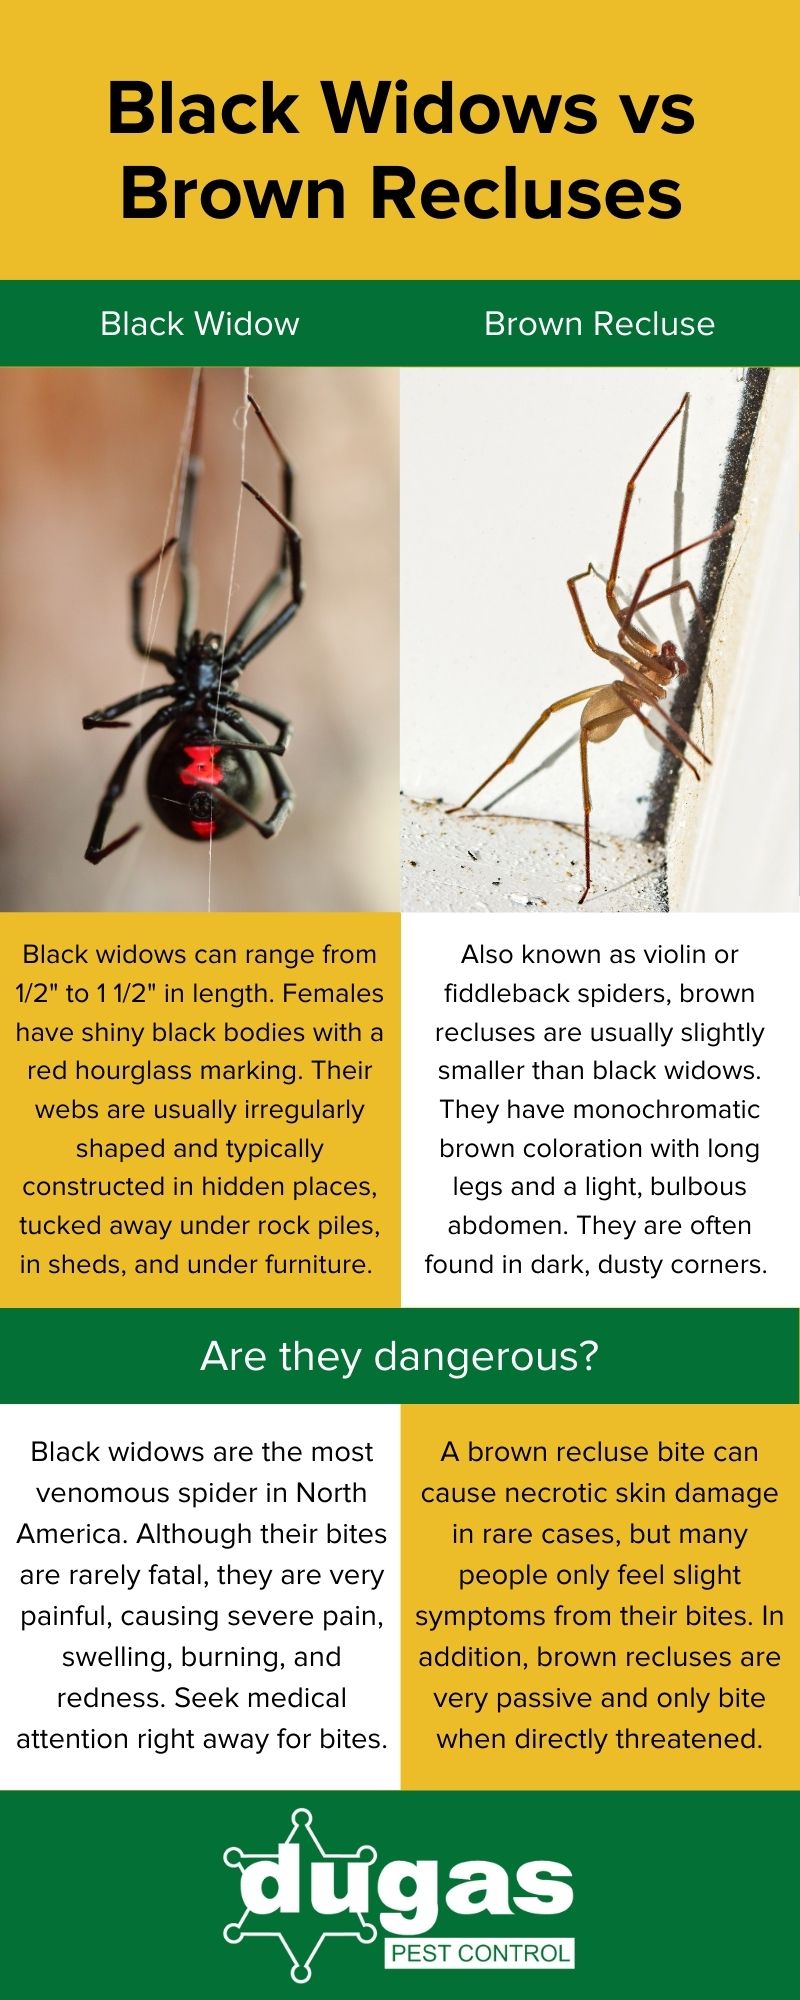 The difference between black widows and brown recluses in Baton Rouge LA - Dugas Pest Control